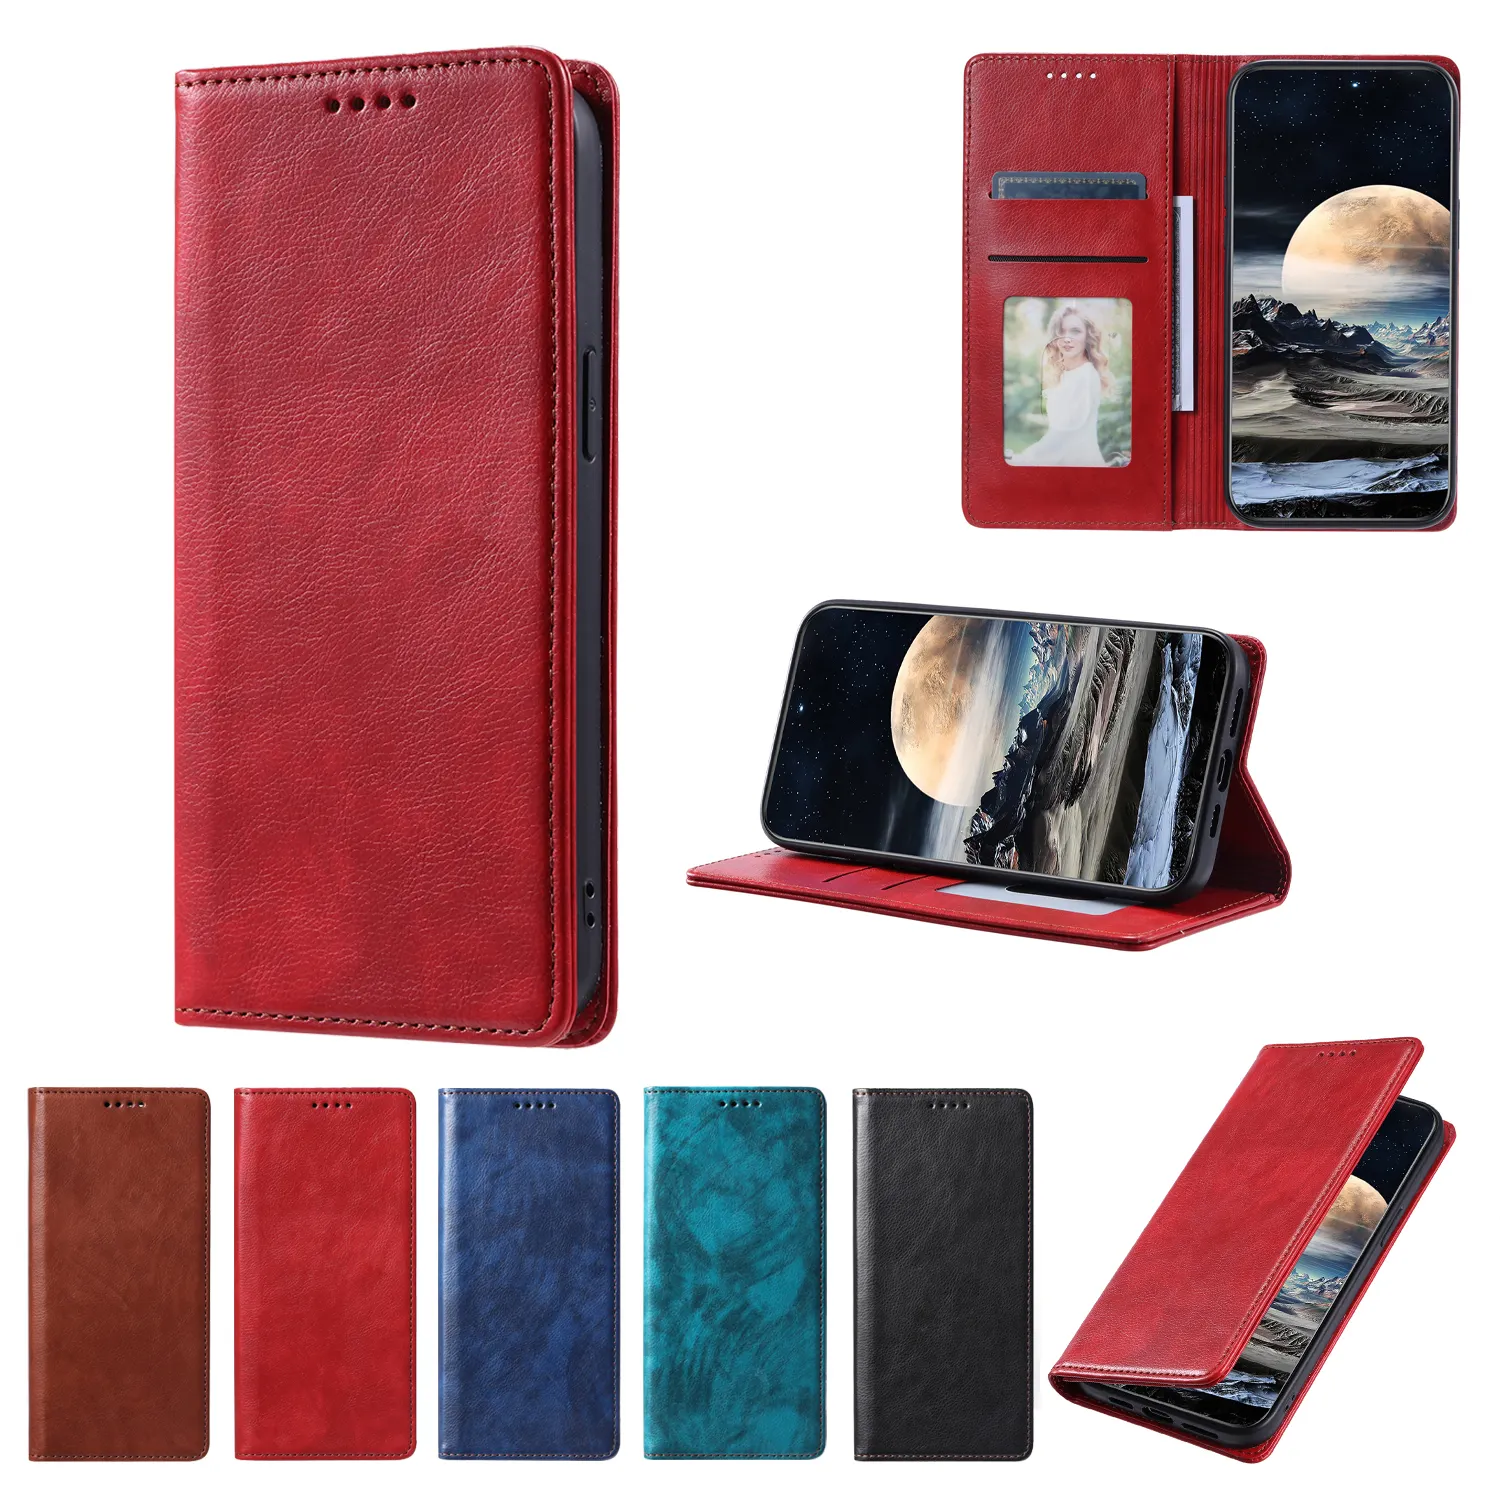 For Samsung Galaxy A21s Red Litchi Grain Leather Wallet Cell Phone Case with Card Slot Purse Flip Cover